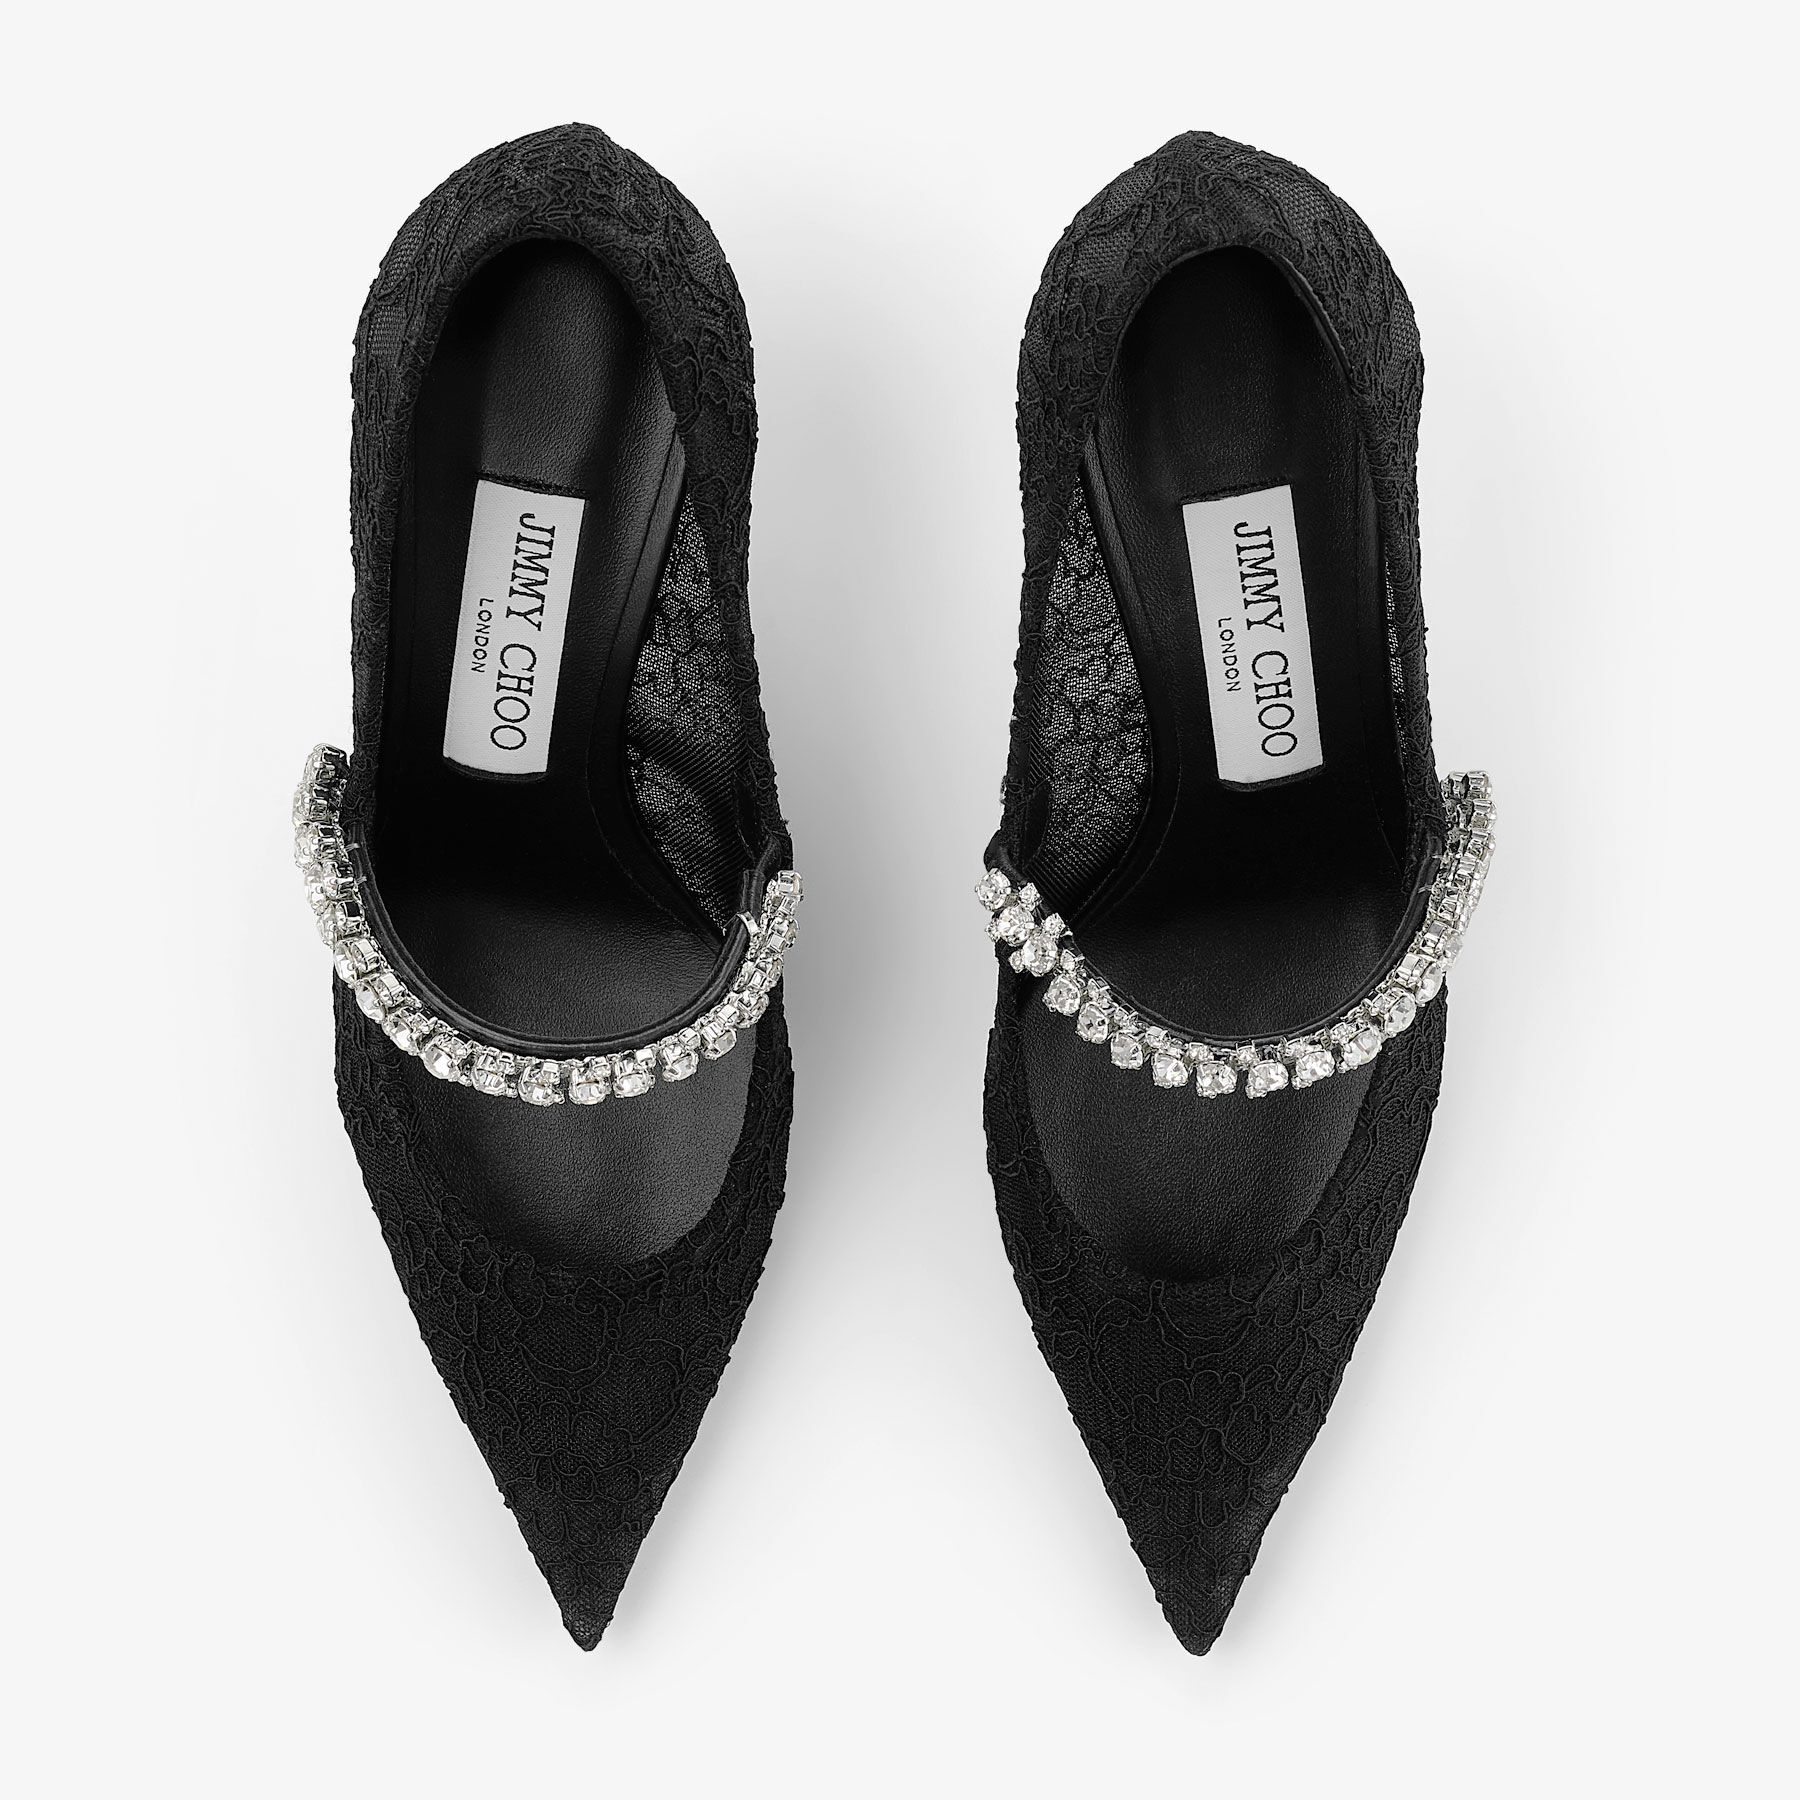 Bing Pump 65 | Black Lace Pumps with crystals | JIMMY CHOO